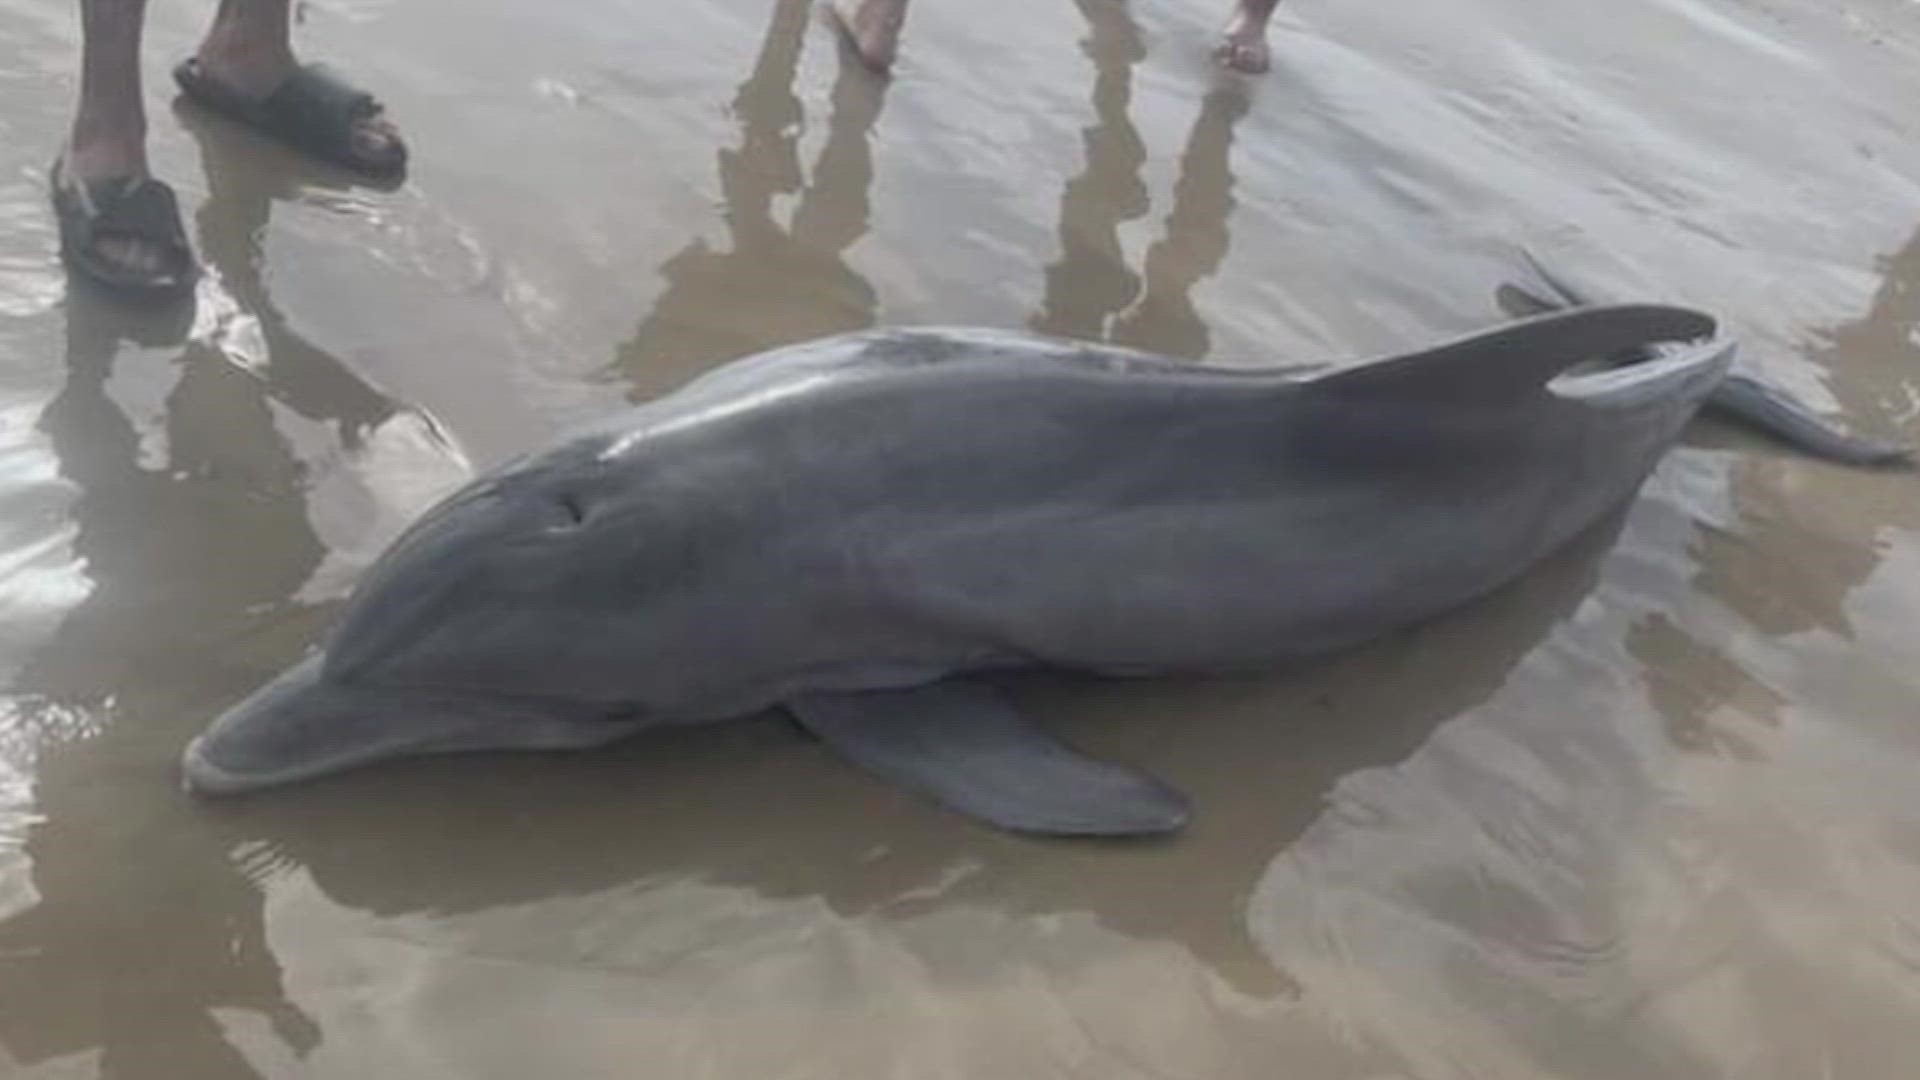 On Sunday, beachgoers found a sick dolphin on the beach and pushed it back out to sea and attempted to swim with and ride the sick animal.